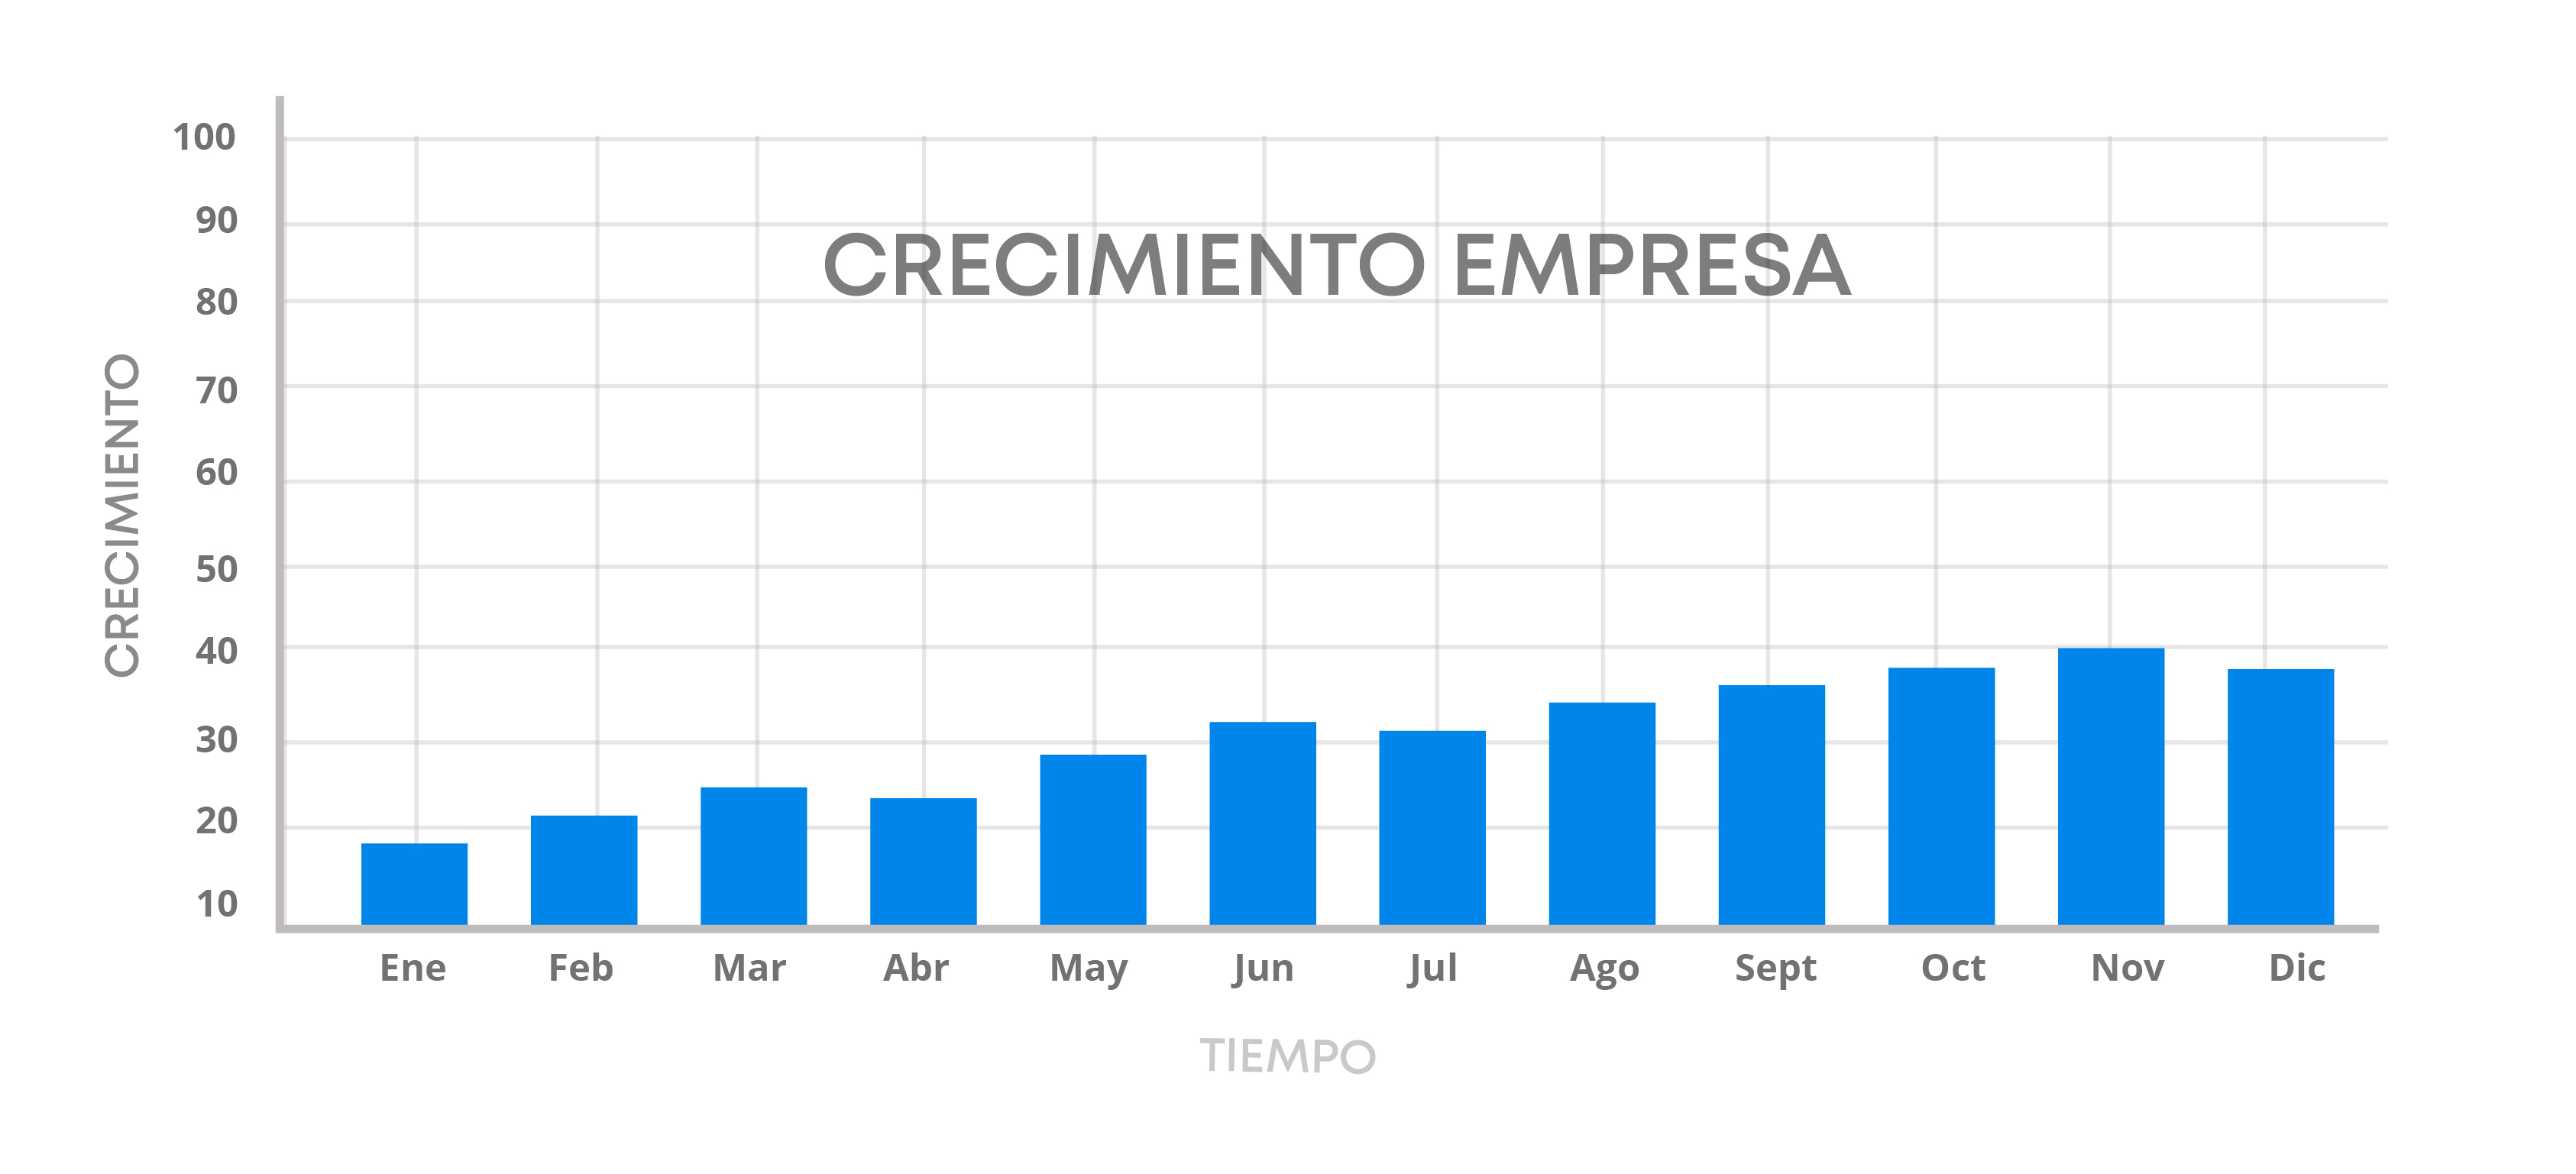 After-Gráfico